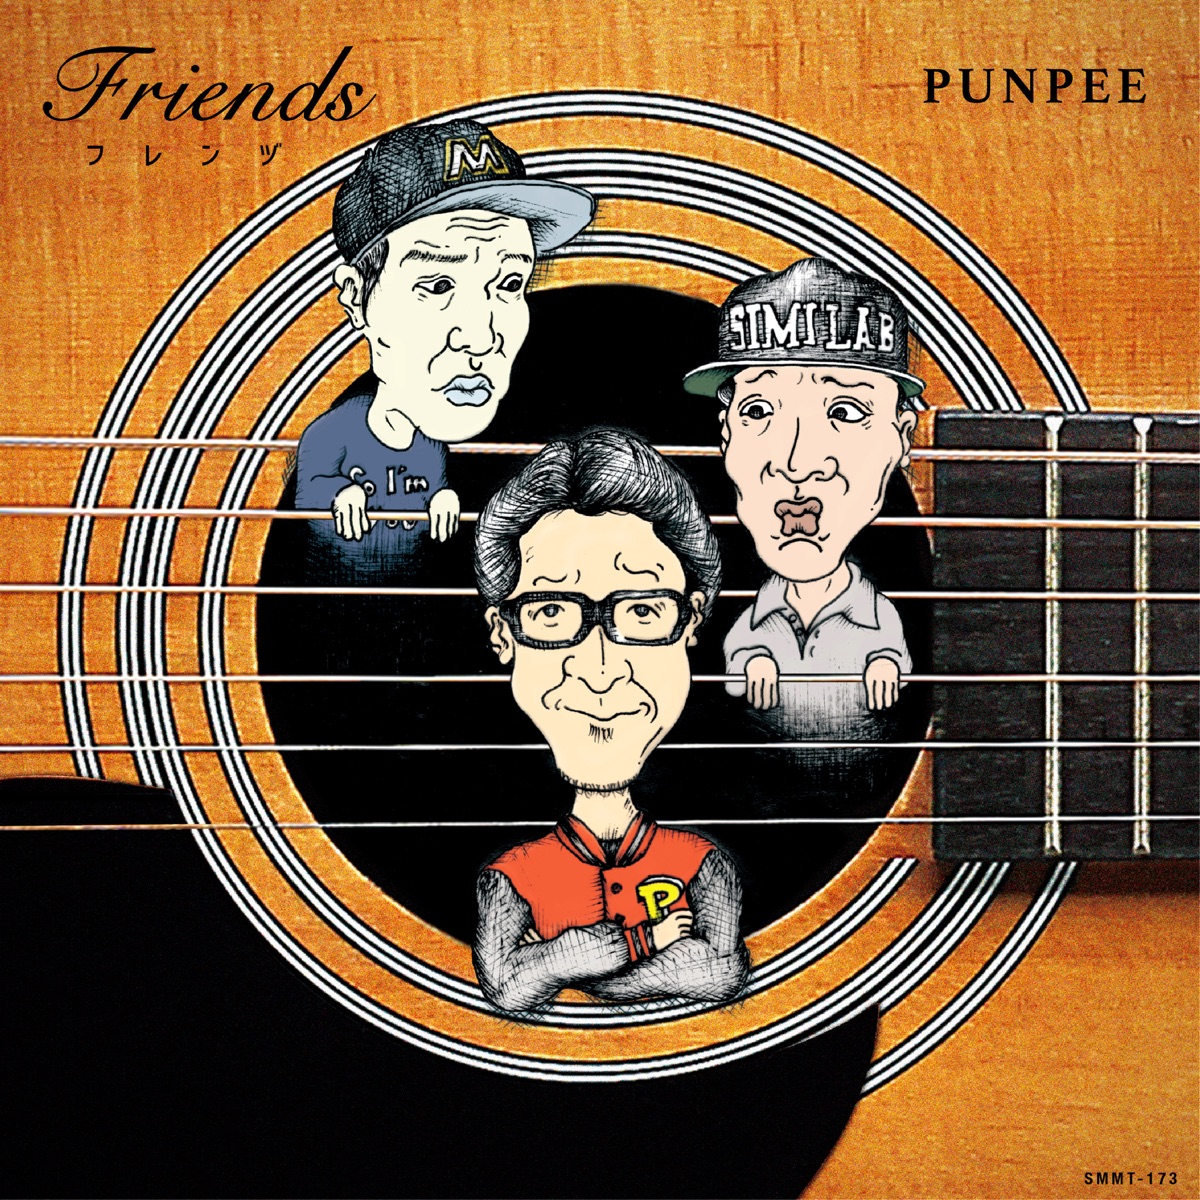 Cover art for『PUNPEE - フレンヅ』from the release『Friends